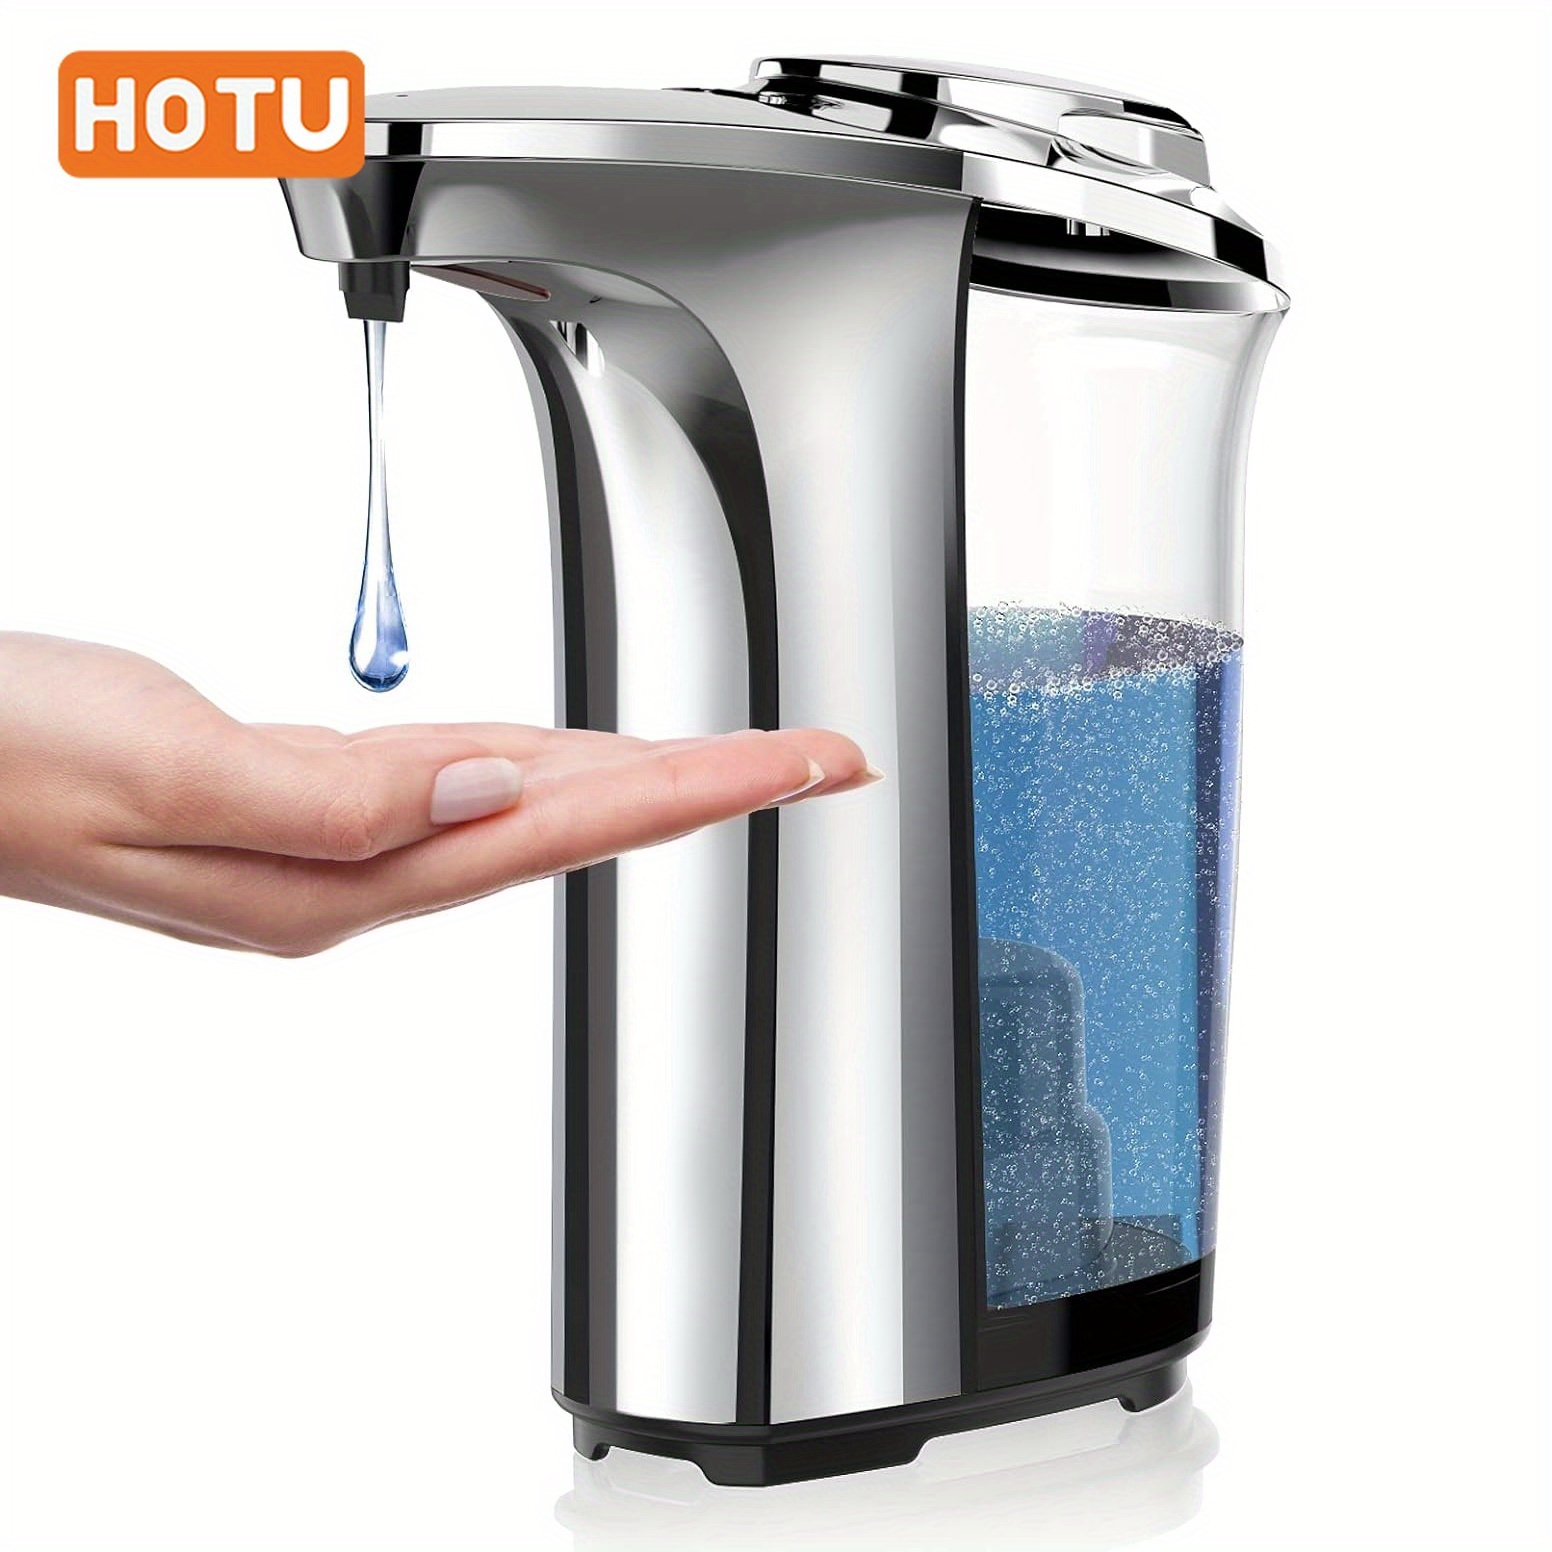 

Automatic Touchless Soap Dispenser: 17oz/480ml Capacity, 5 Adjustable Levels, Infrared Sensor, Suitable For Bathroom Use (silver)